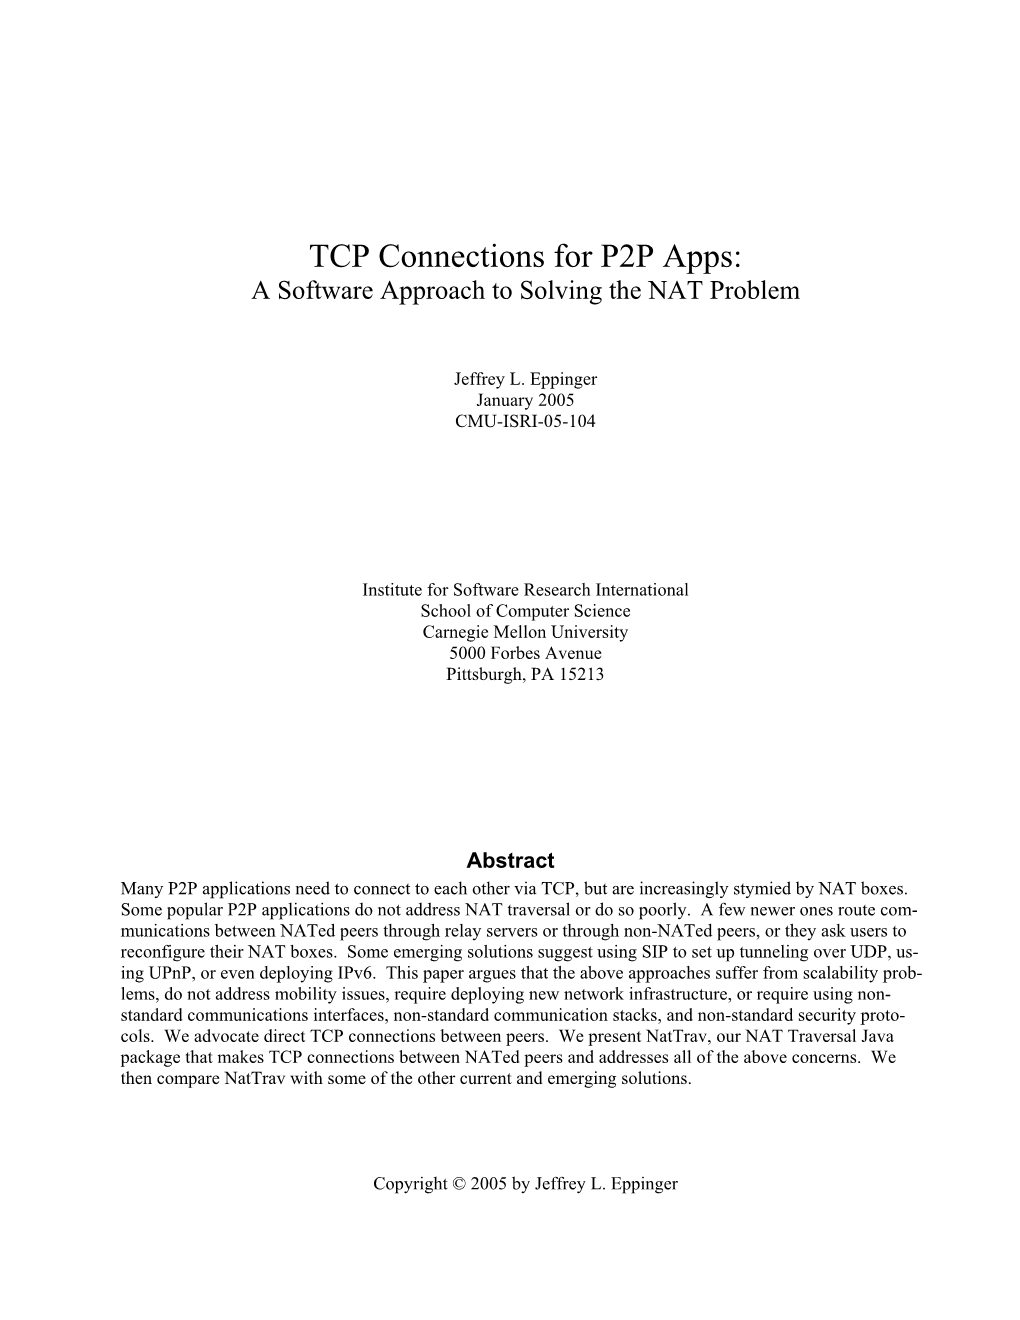 TCP Connections for P2P Apps: a Software Approach to Solving the NAT Problem